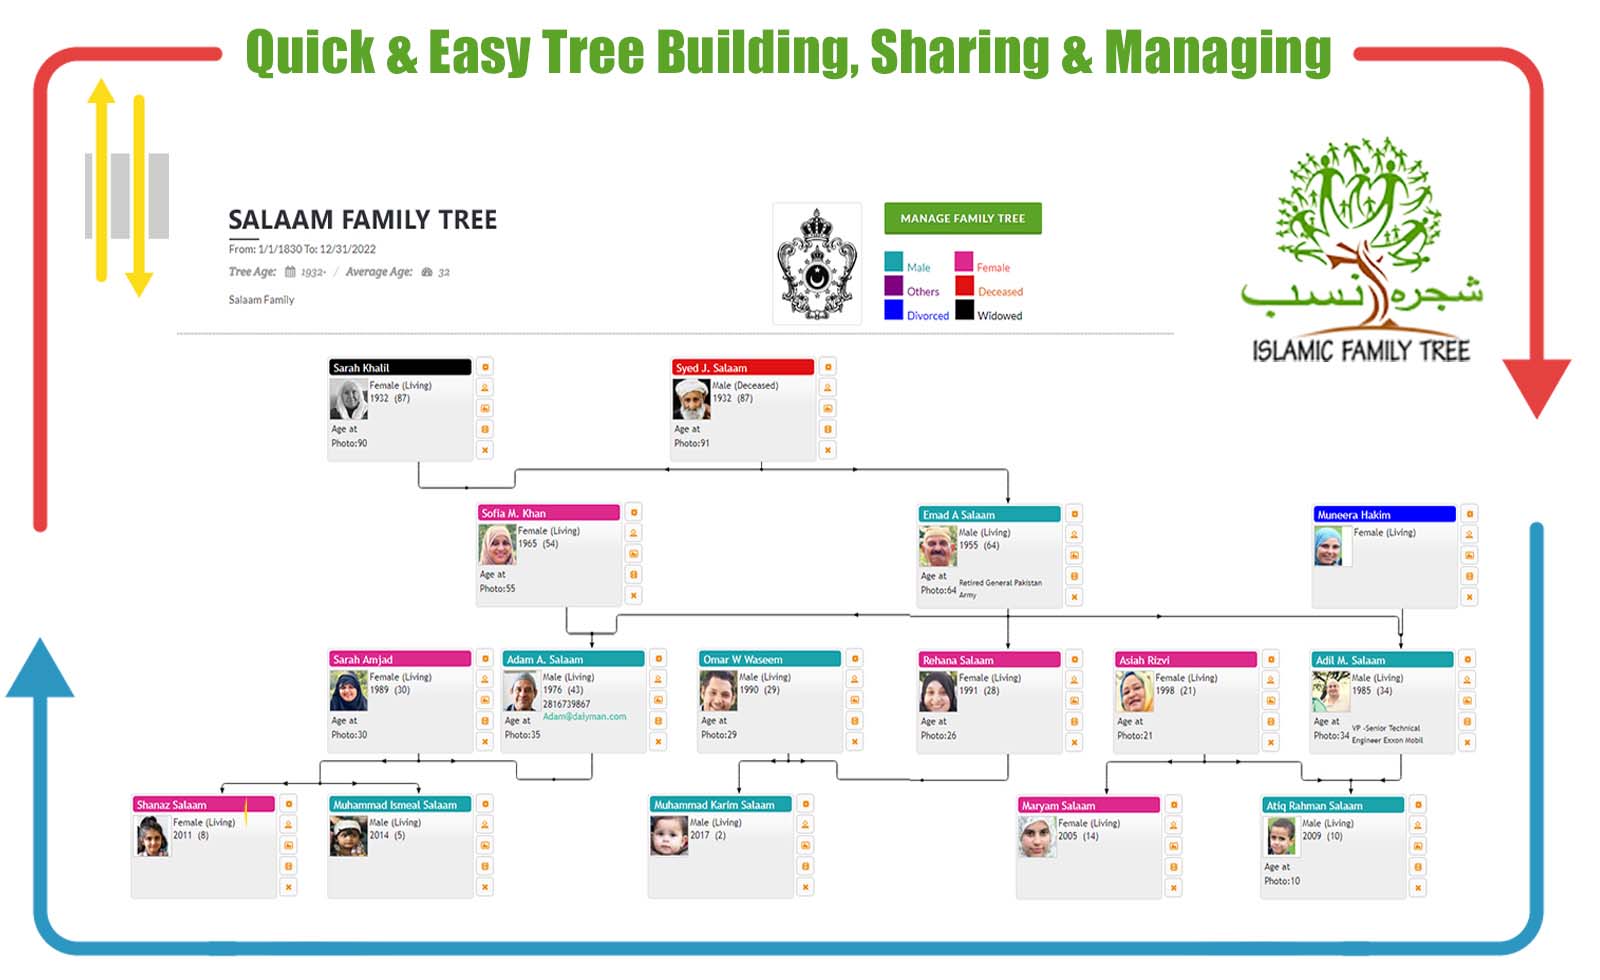 Quick & Easy Tree Building, Sharing & Managing